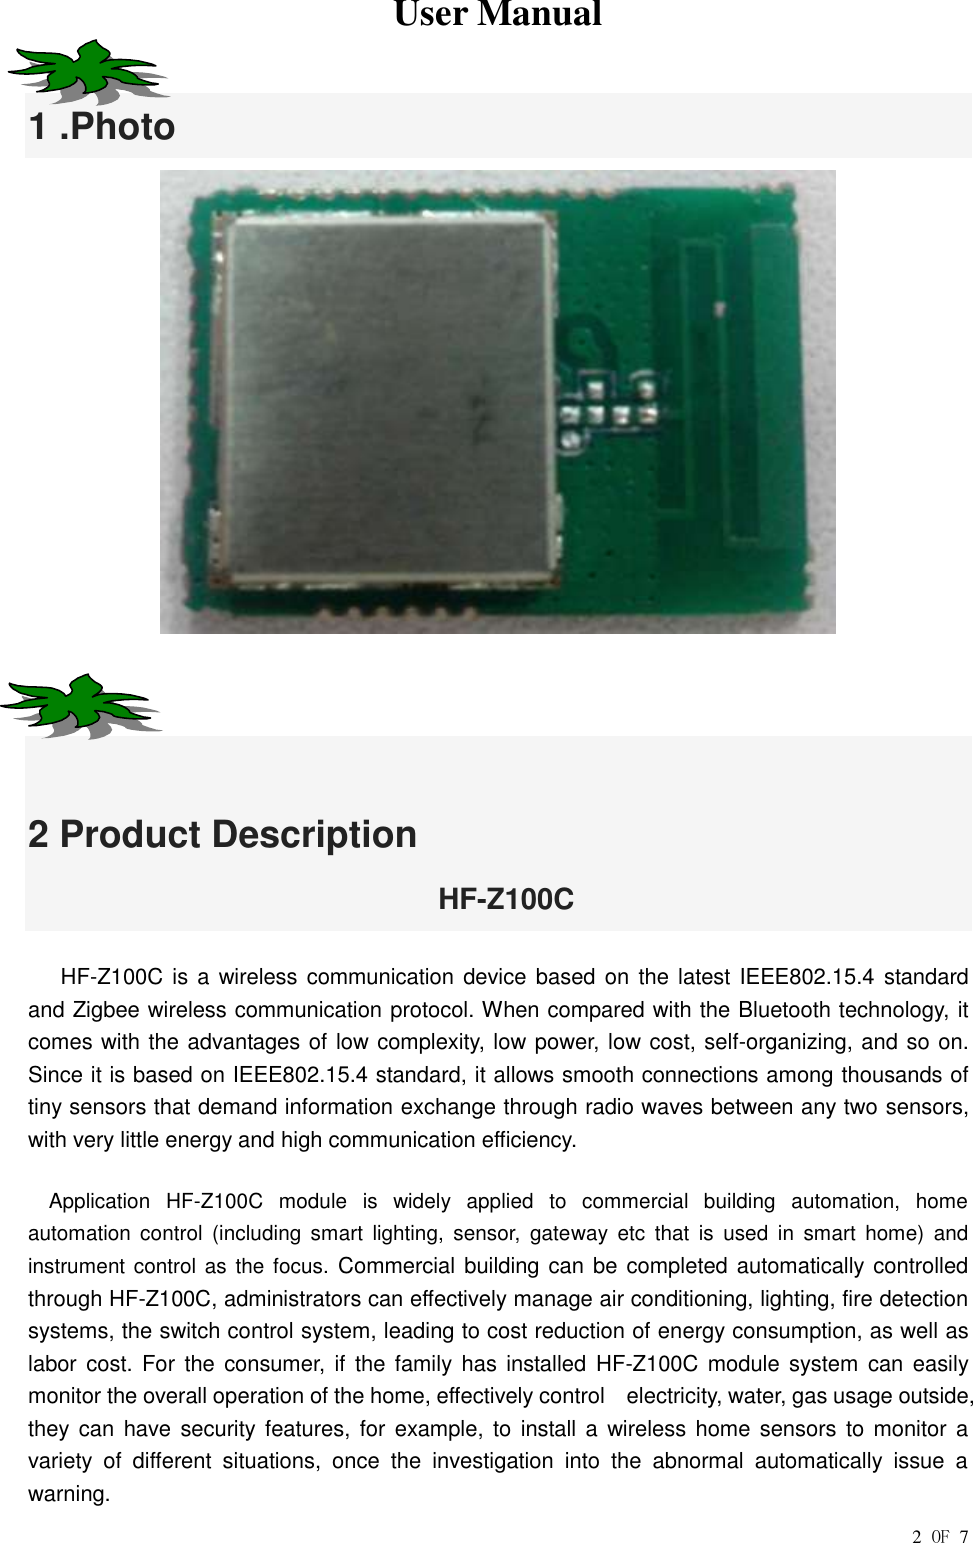  User Manual        2 OF 7 1 .Photo    2 Product Description                             HF-Z100C    HF-Z100C is a wireless communication device based on the latest IEEE802.15.4 standard and Zigbee wireless communication protocol. When compared with the Bluetooth technology, it comes with the advantages of low complexity, low power, low cost, self-organizing, and so on. Since it is based on IEEE802.15.4 standard, it allows smooth connections among thousands of tiny sensors that demand information exchange through radio waves between any two sensors, with very little energy and high communication efficiency. Application  HF-Z100C  module  is  widely  applied  to  commercial  building  automation,  home automation  control  (including  smart  lighting,  sensor,  gateway  etc  that  is  used  in  smart  home)  and instrument  control as  the focus. Commercial building can  be completed automatically controlled through HF-Z100C, administrators can effectively manage air conditioning, lighting, fire detection systems, the switch control system, leading to cost reduction of energy consumption, as well as labor cost. For the  consumer,  if  the  family  has installed HF-Z100C  module system can easily monitor the overall operation of the home, effectively control    electricity, water, gas usage outside, they can  have security features, for example,  to  install  a  wireless home sensors to  monitor a variety  of  different  situations,  once  the  investigation  into  the  abnormal  automatically  issue  a warning. 